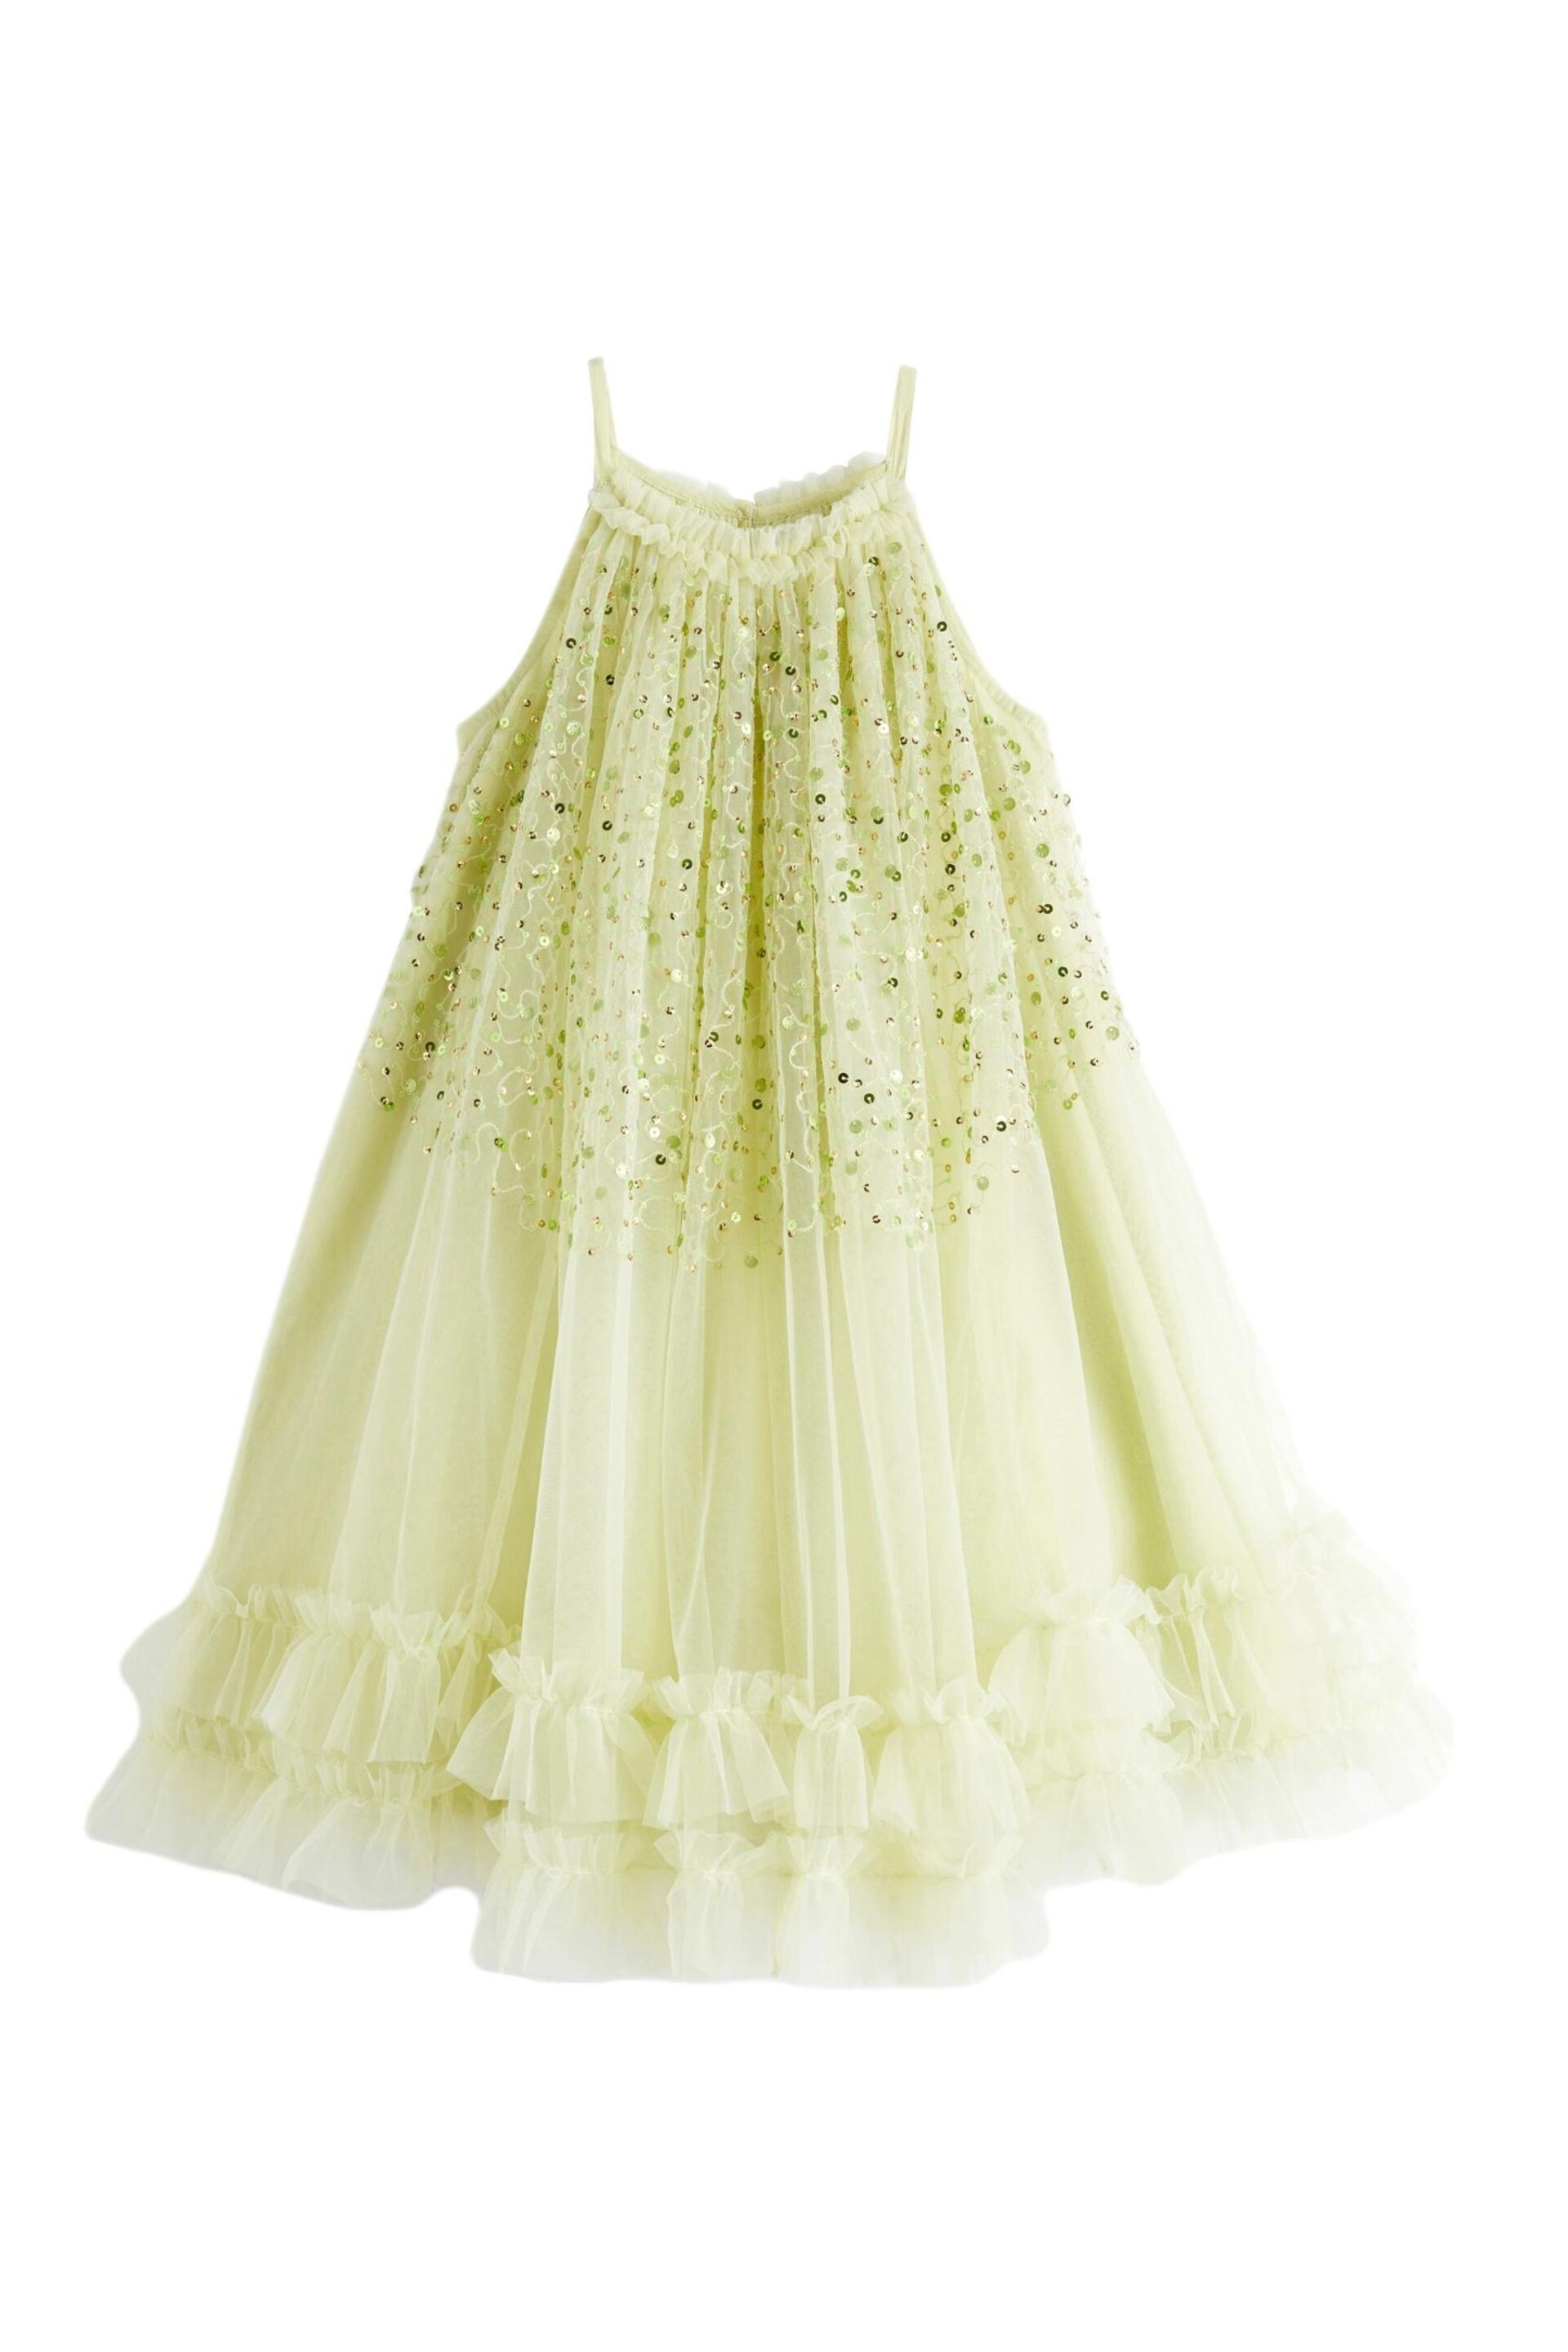 Matcha Green Sequin Mesh Trapeze Occasion Dress (3-16yrs) - Image 5 of 7